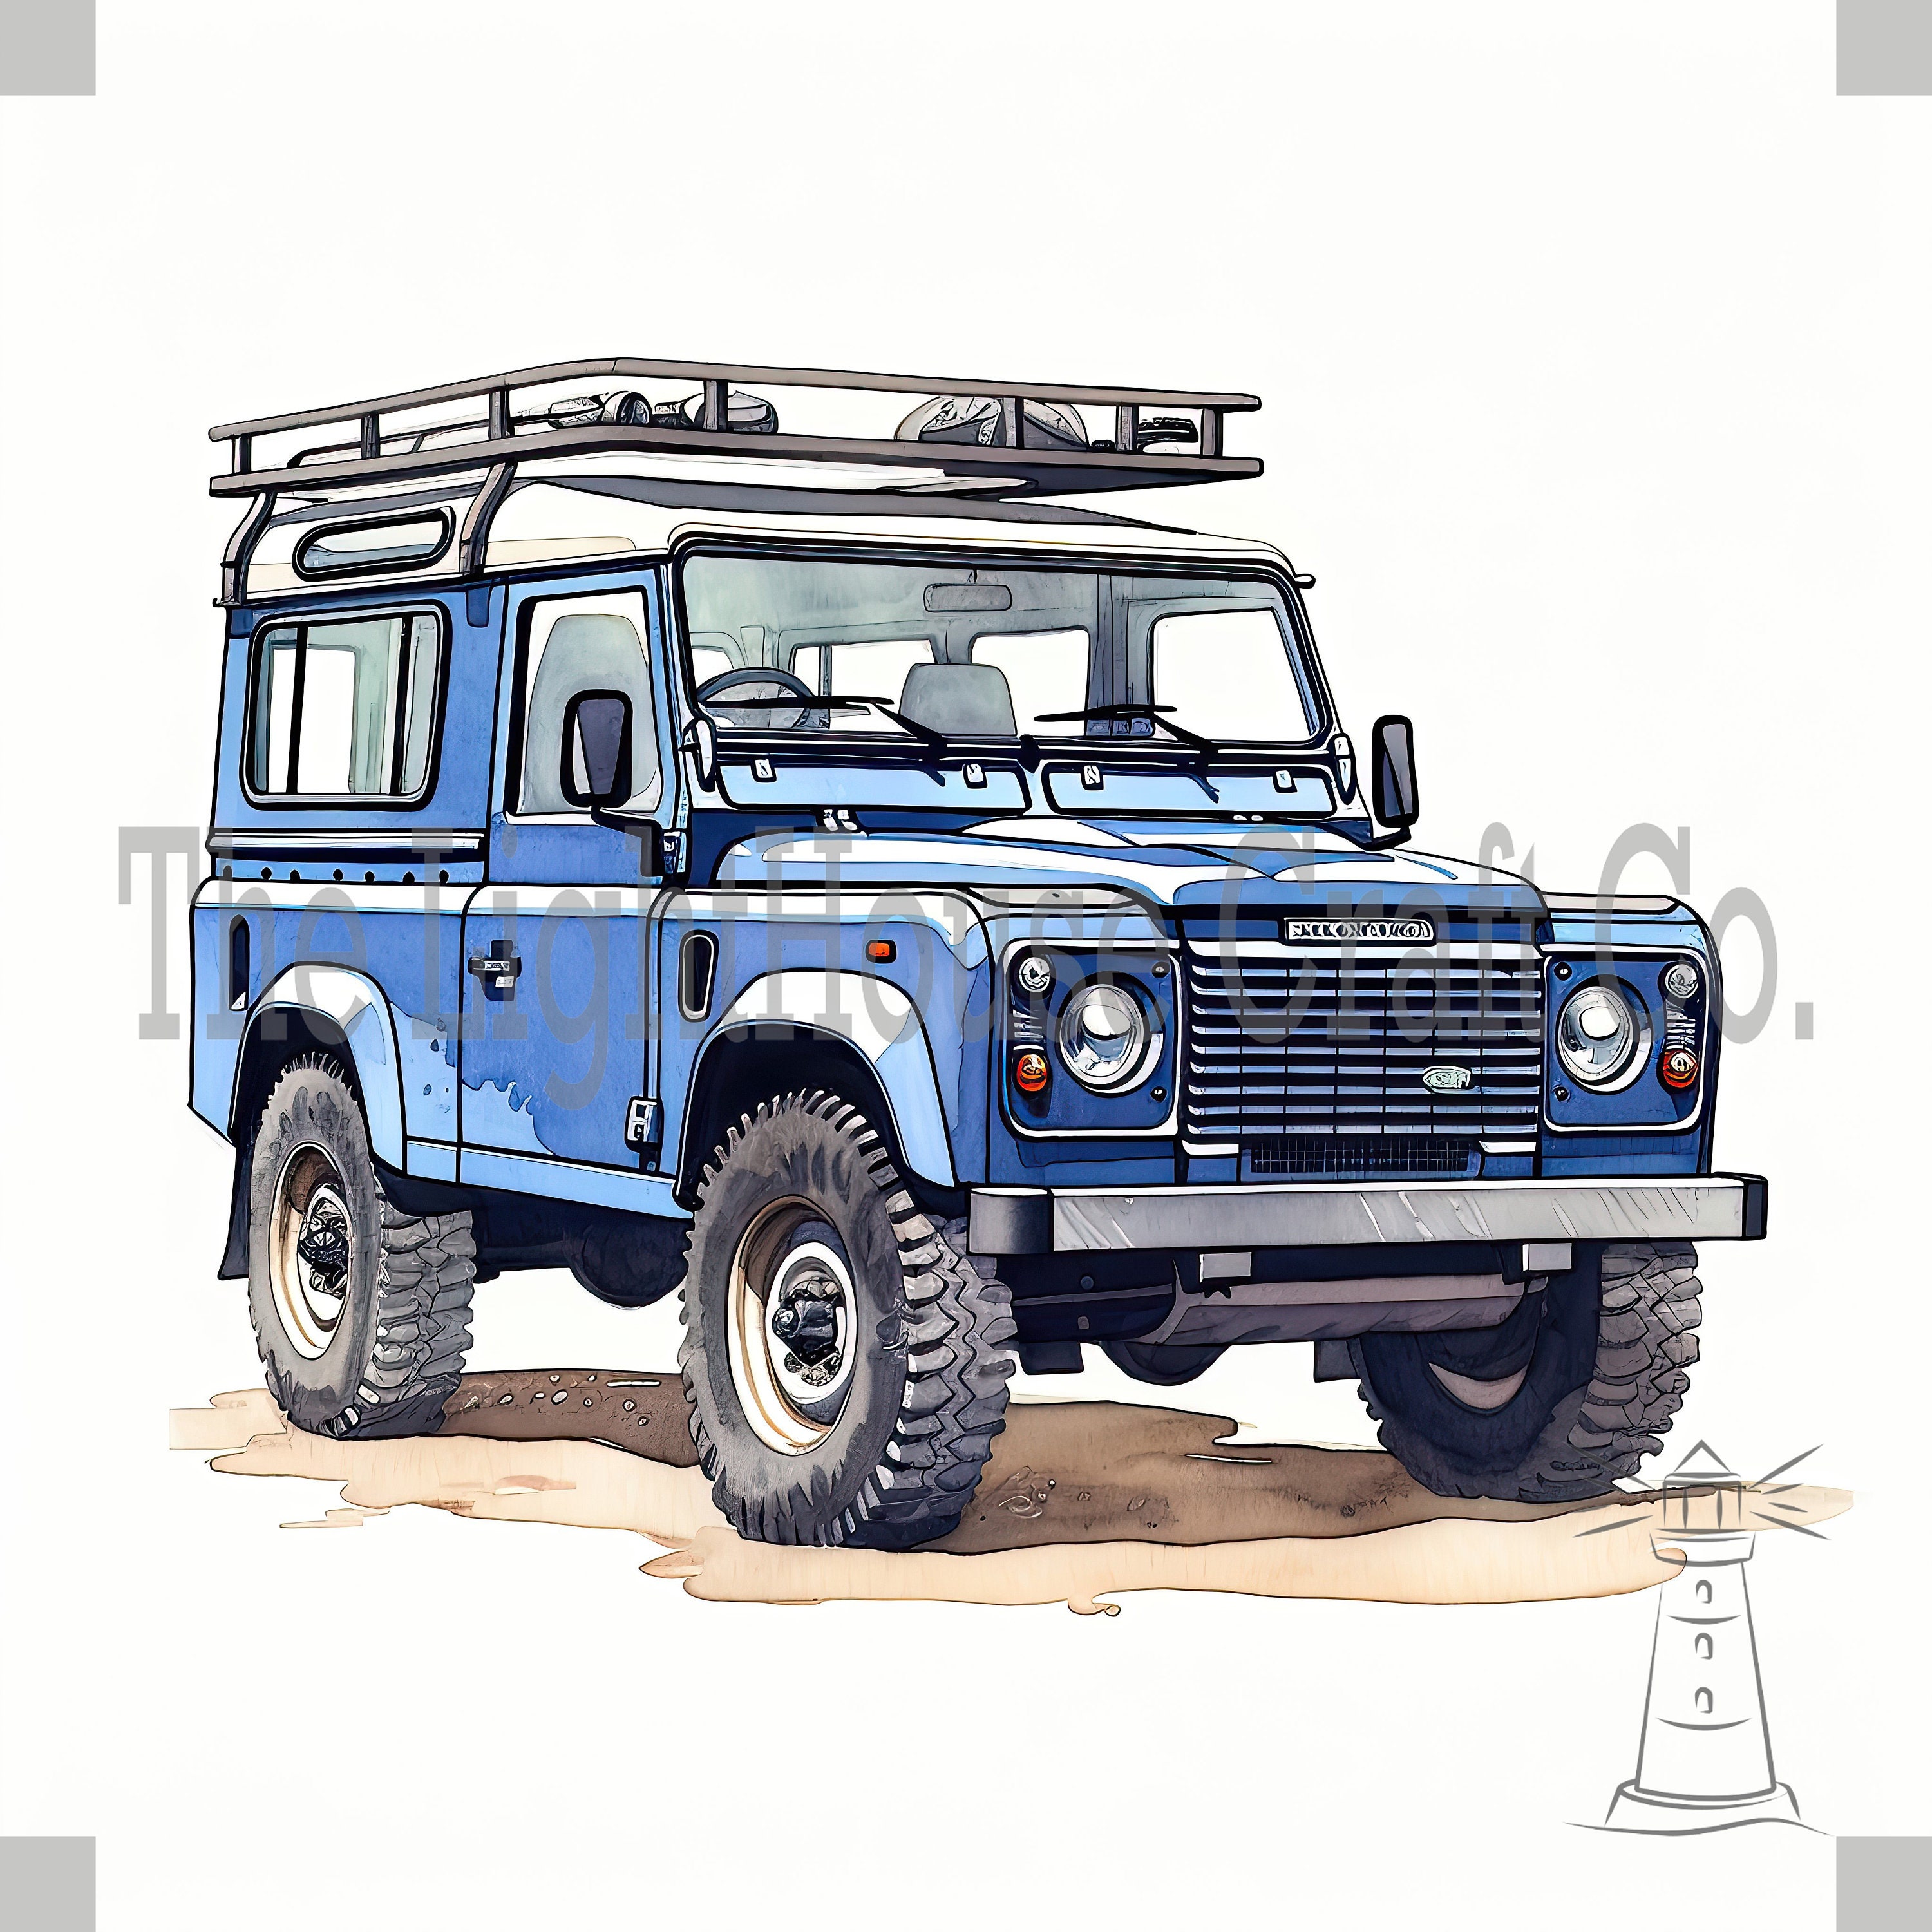 Land Rover Defender Clip Art 12 High Quality Jpgs Digital Planner,  Journaling, Watercolour, Wall Art, Commercial Use Digital Download 